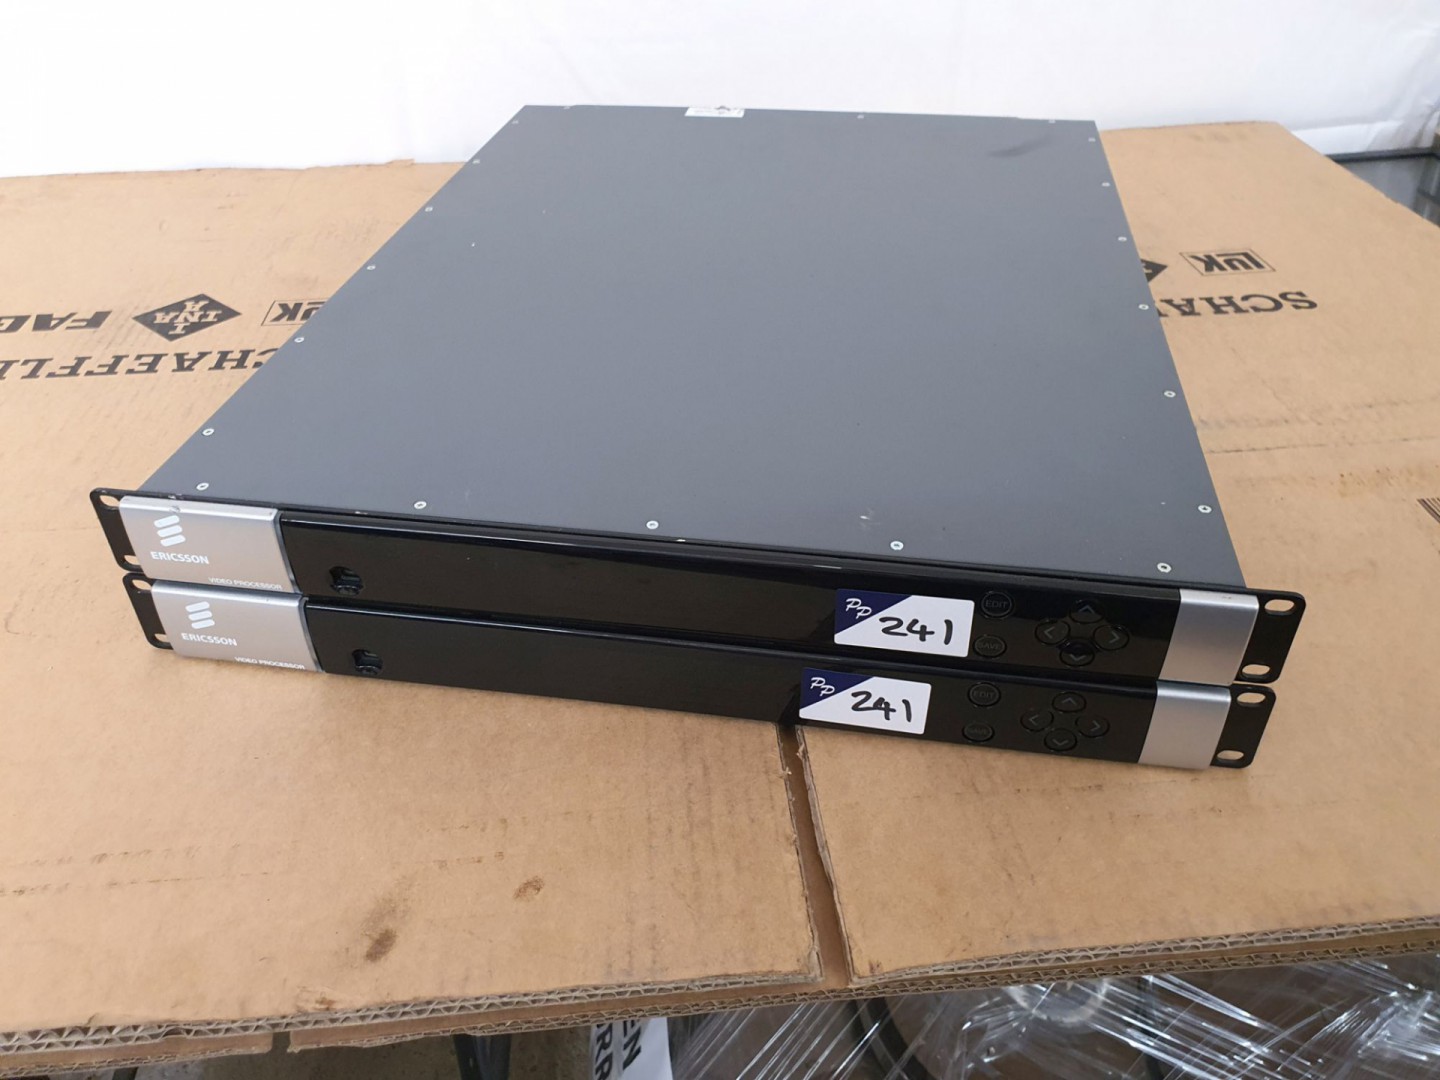 2x Ericsson video processors with 6x EN8130 SD tra...